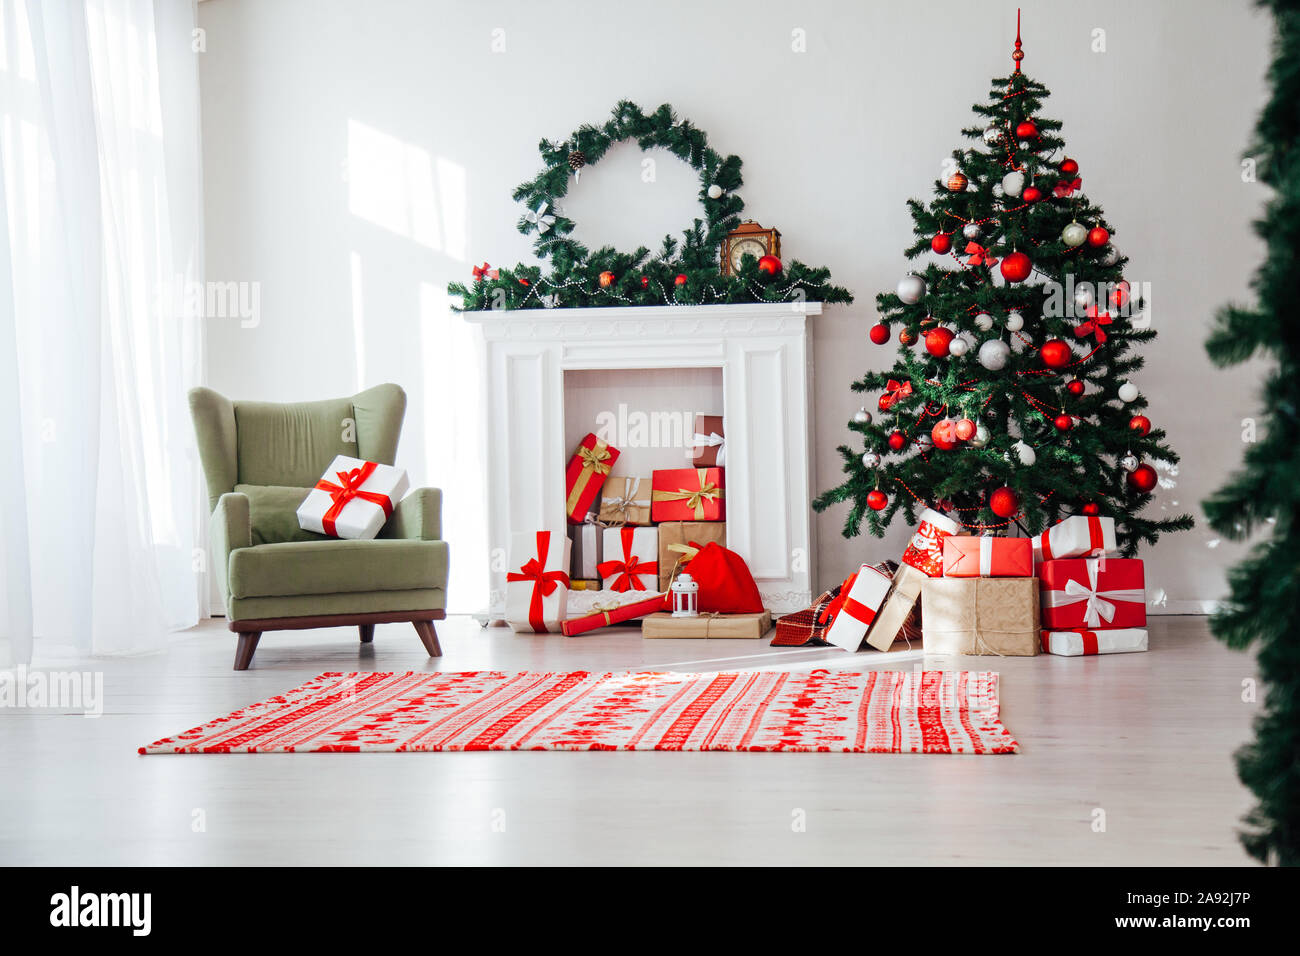 Christmas home interior Christmas tree red gifts new year decor festive  background Stock Photo - Alamy